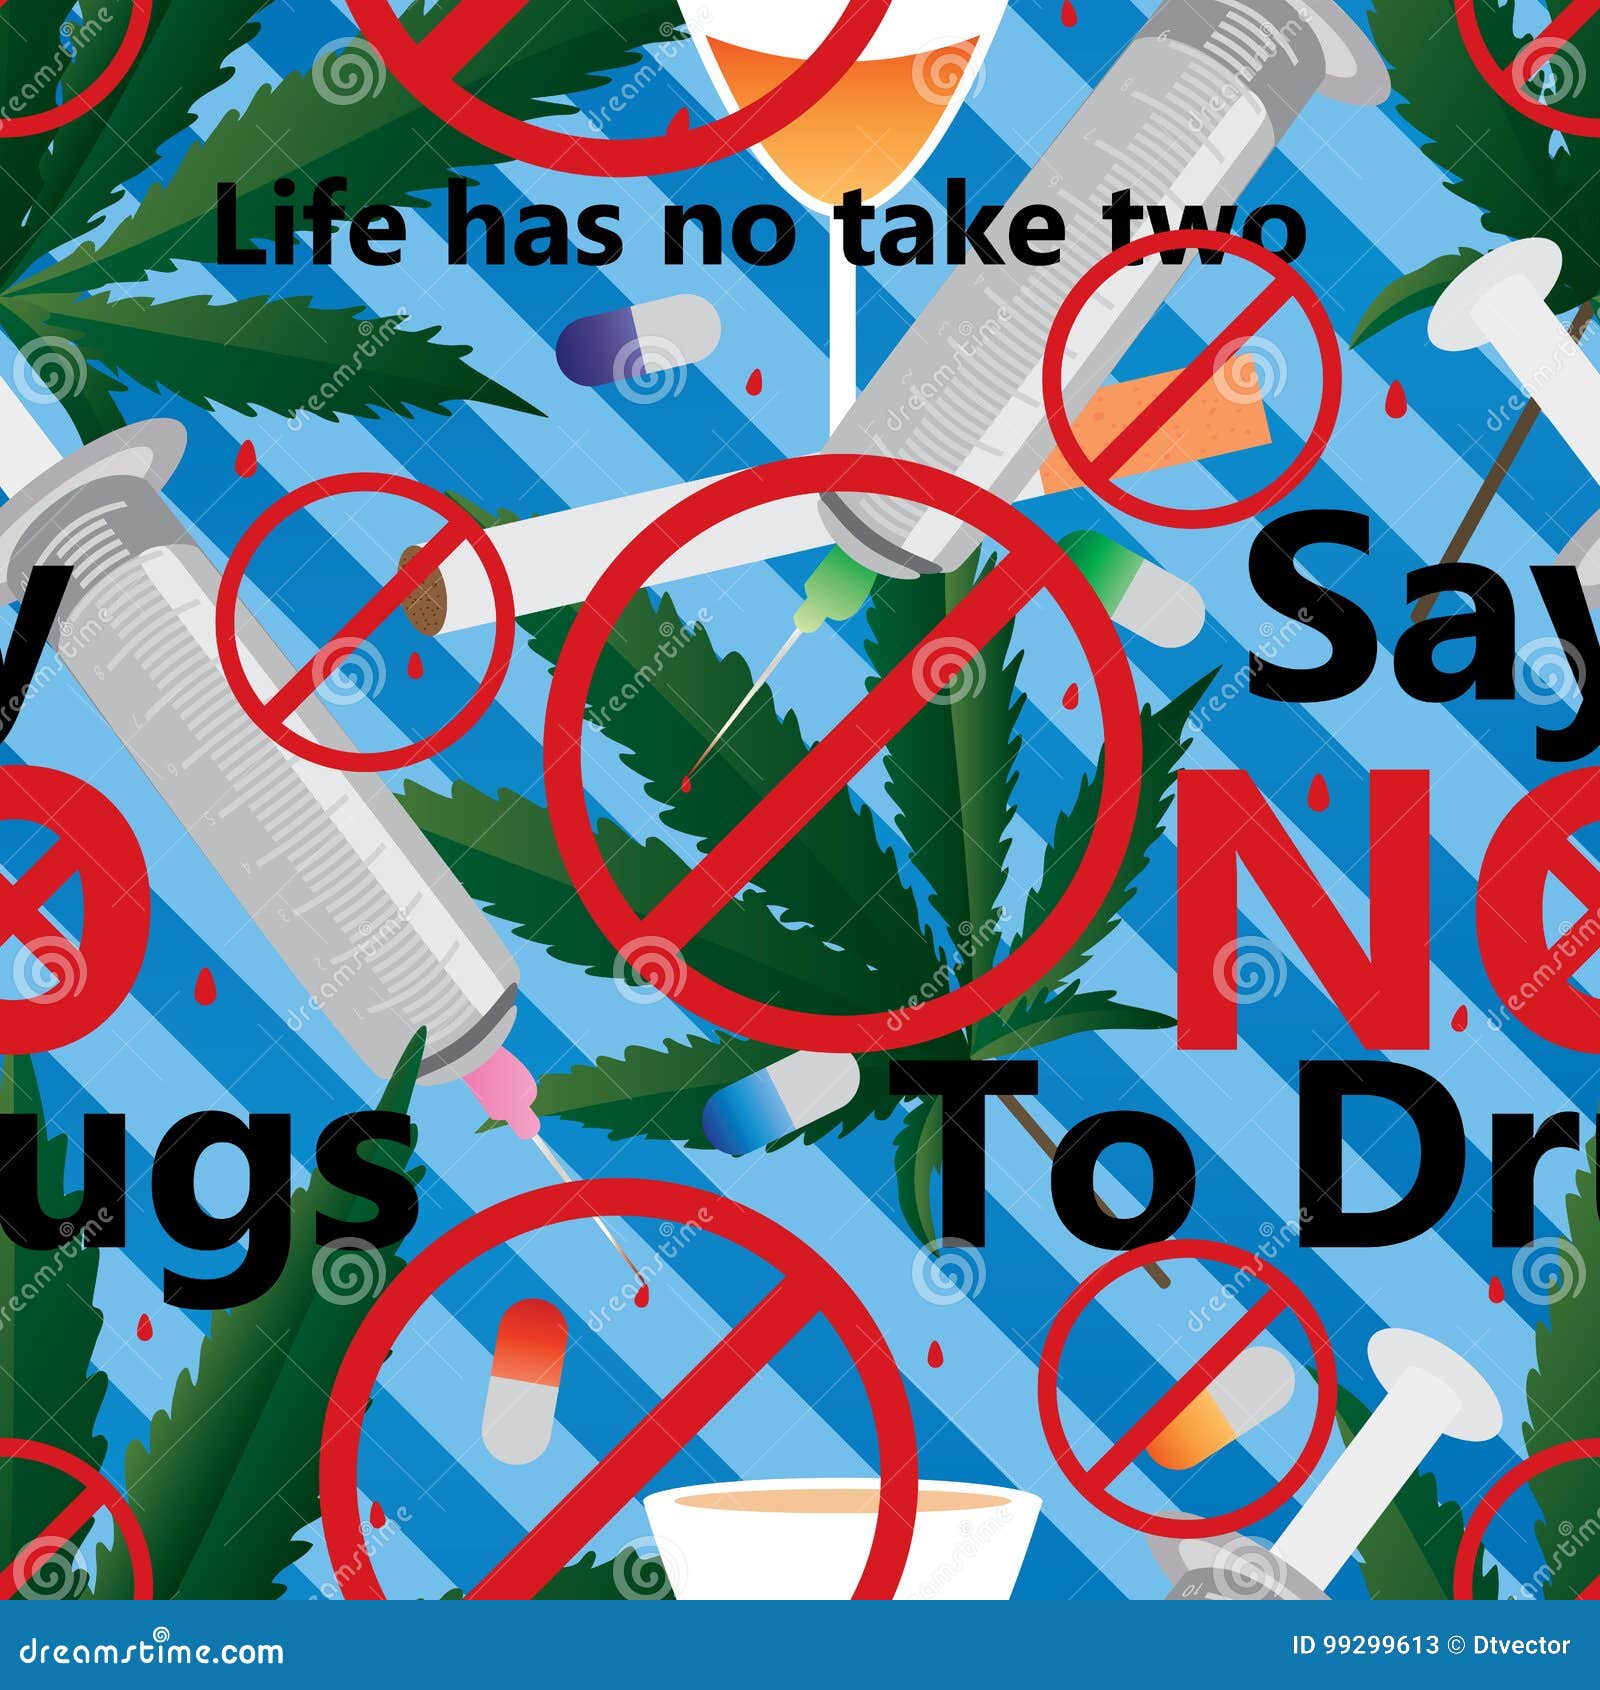 about say no to drugs